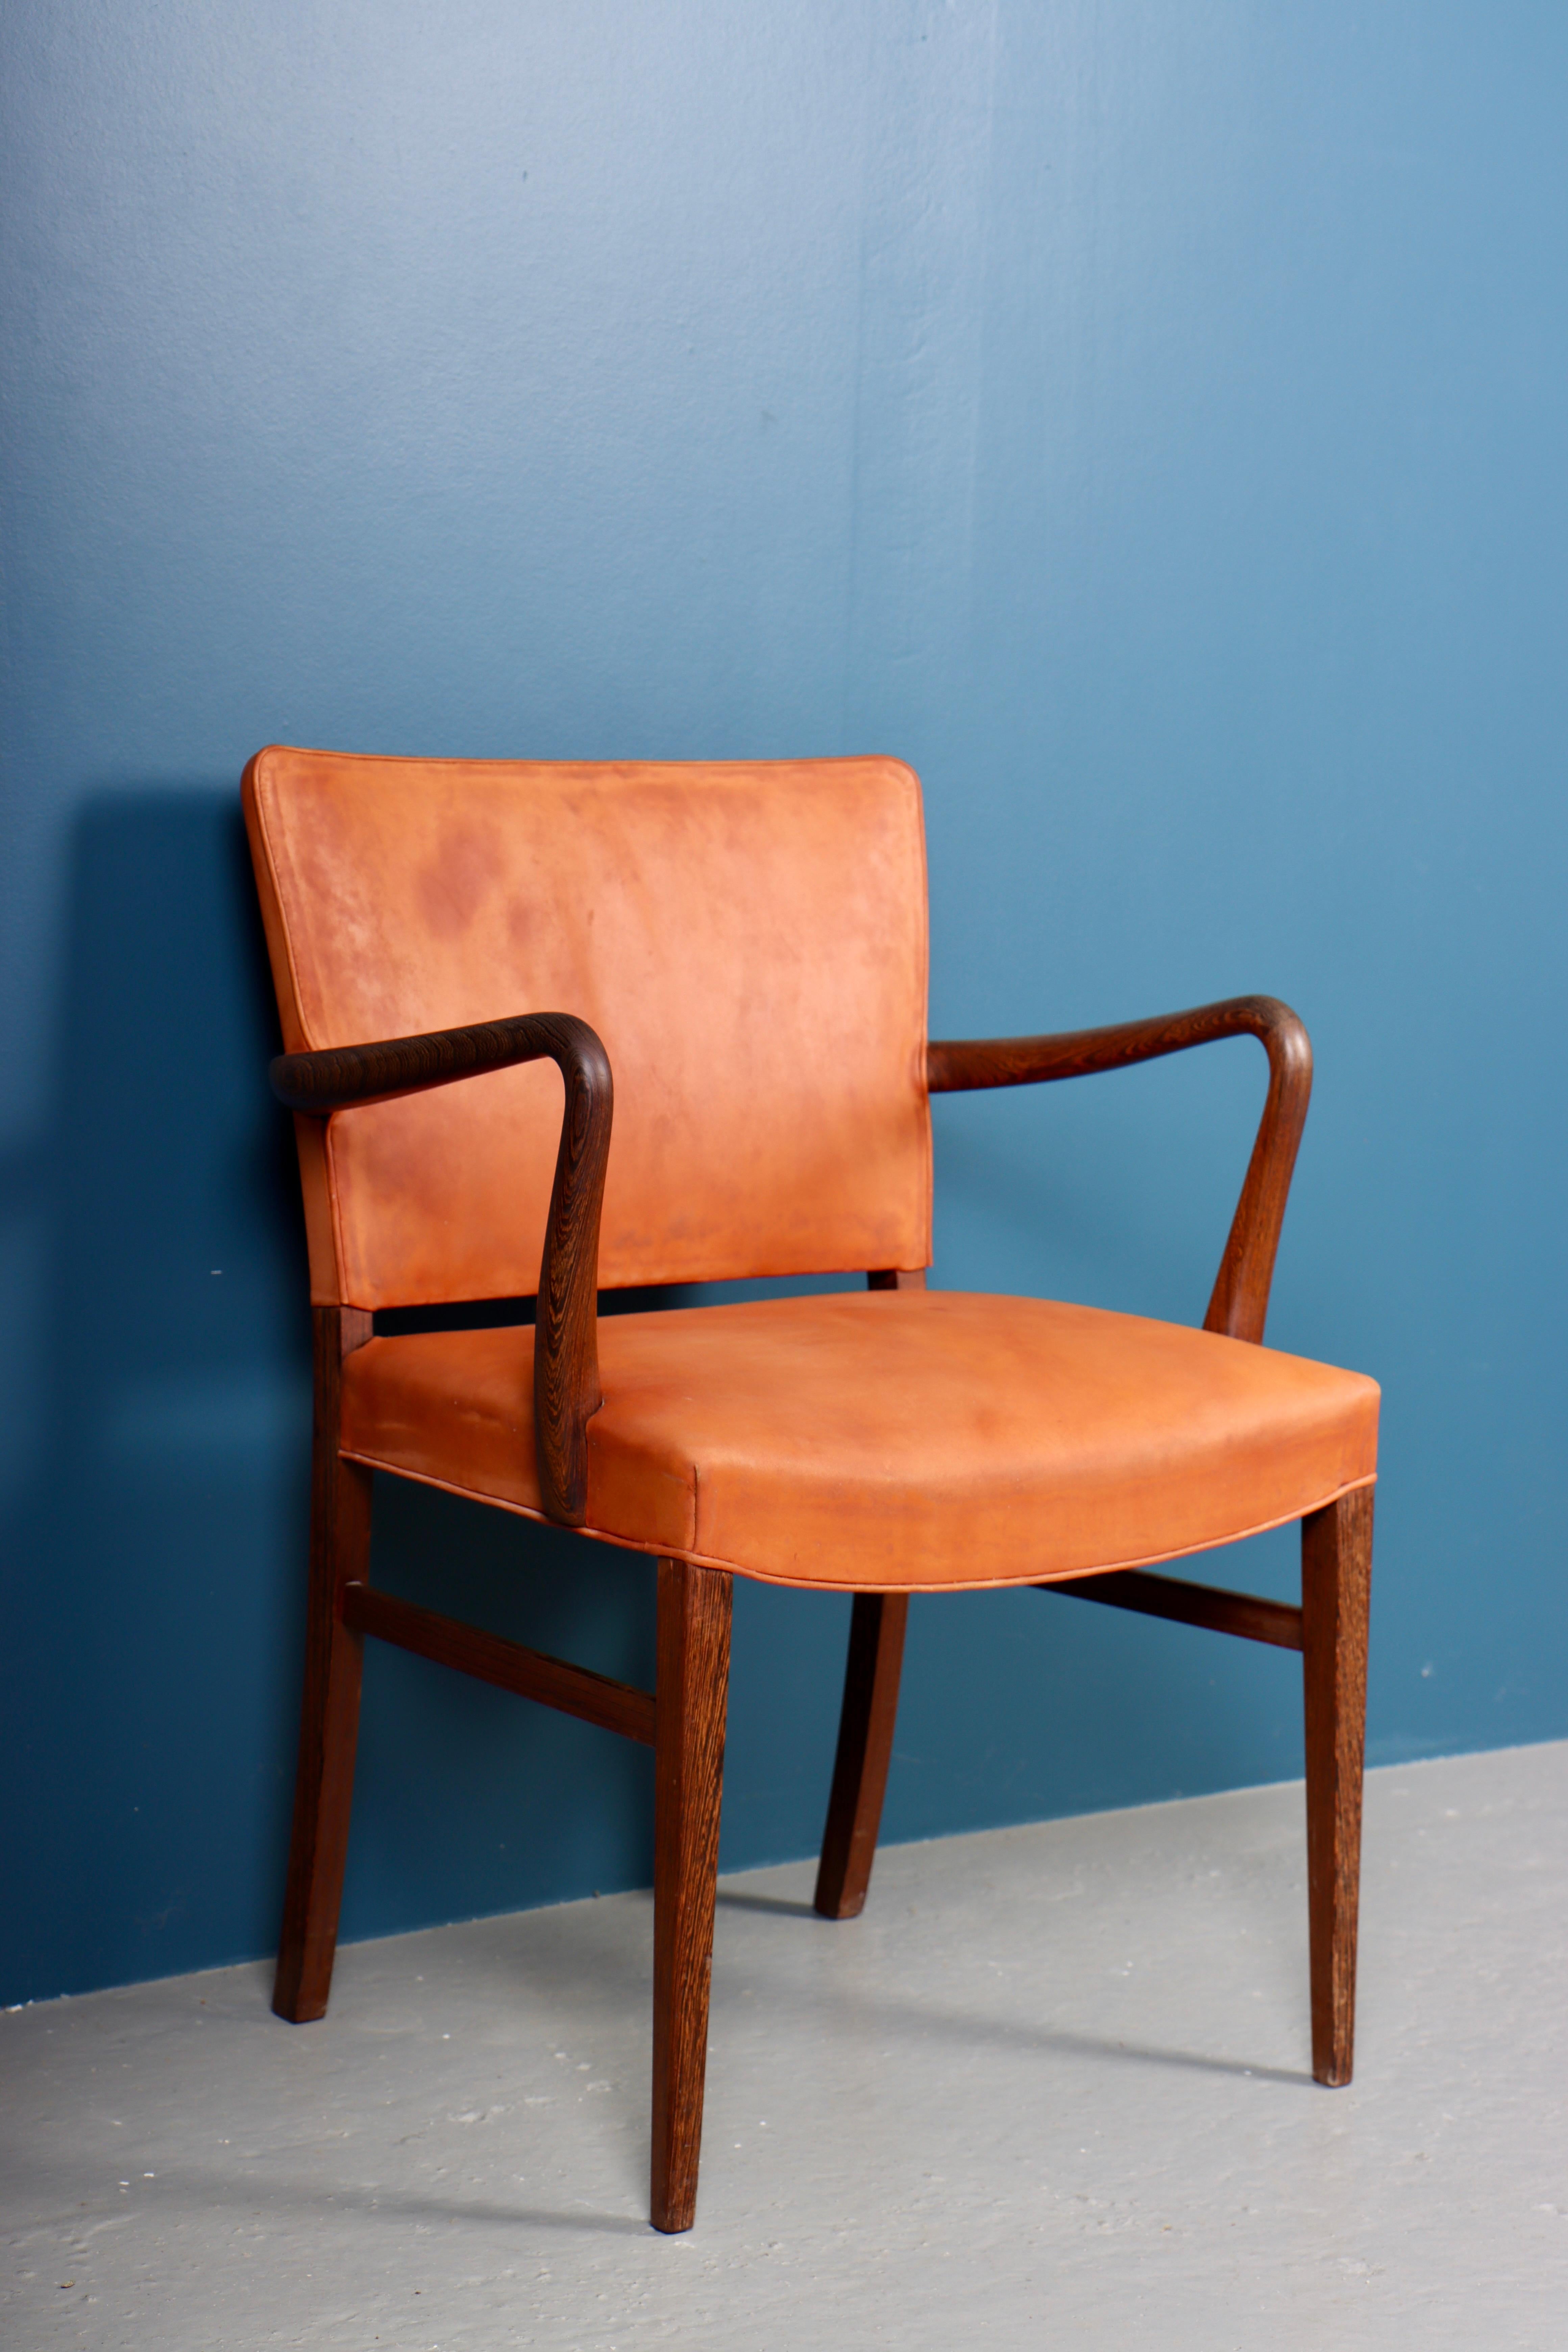 Scandinavian Modern Rare Midcentury Armchair in Patinated Leather and Wenge, Danish Design, 1950s For Sale